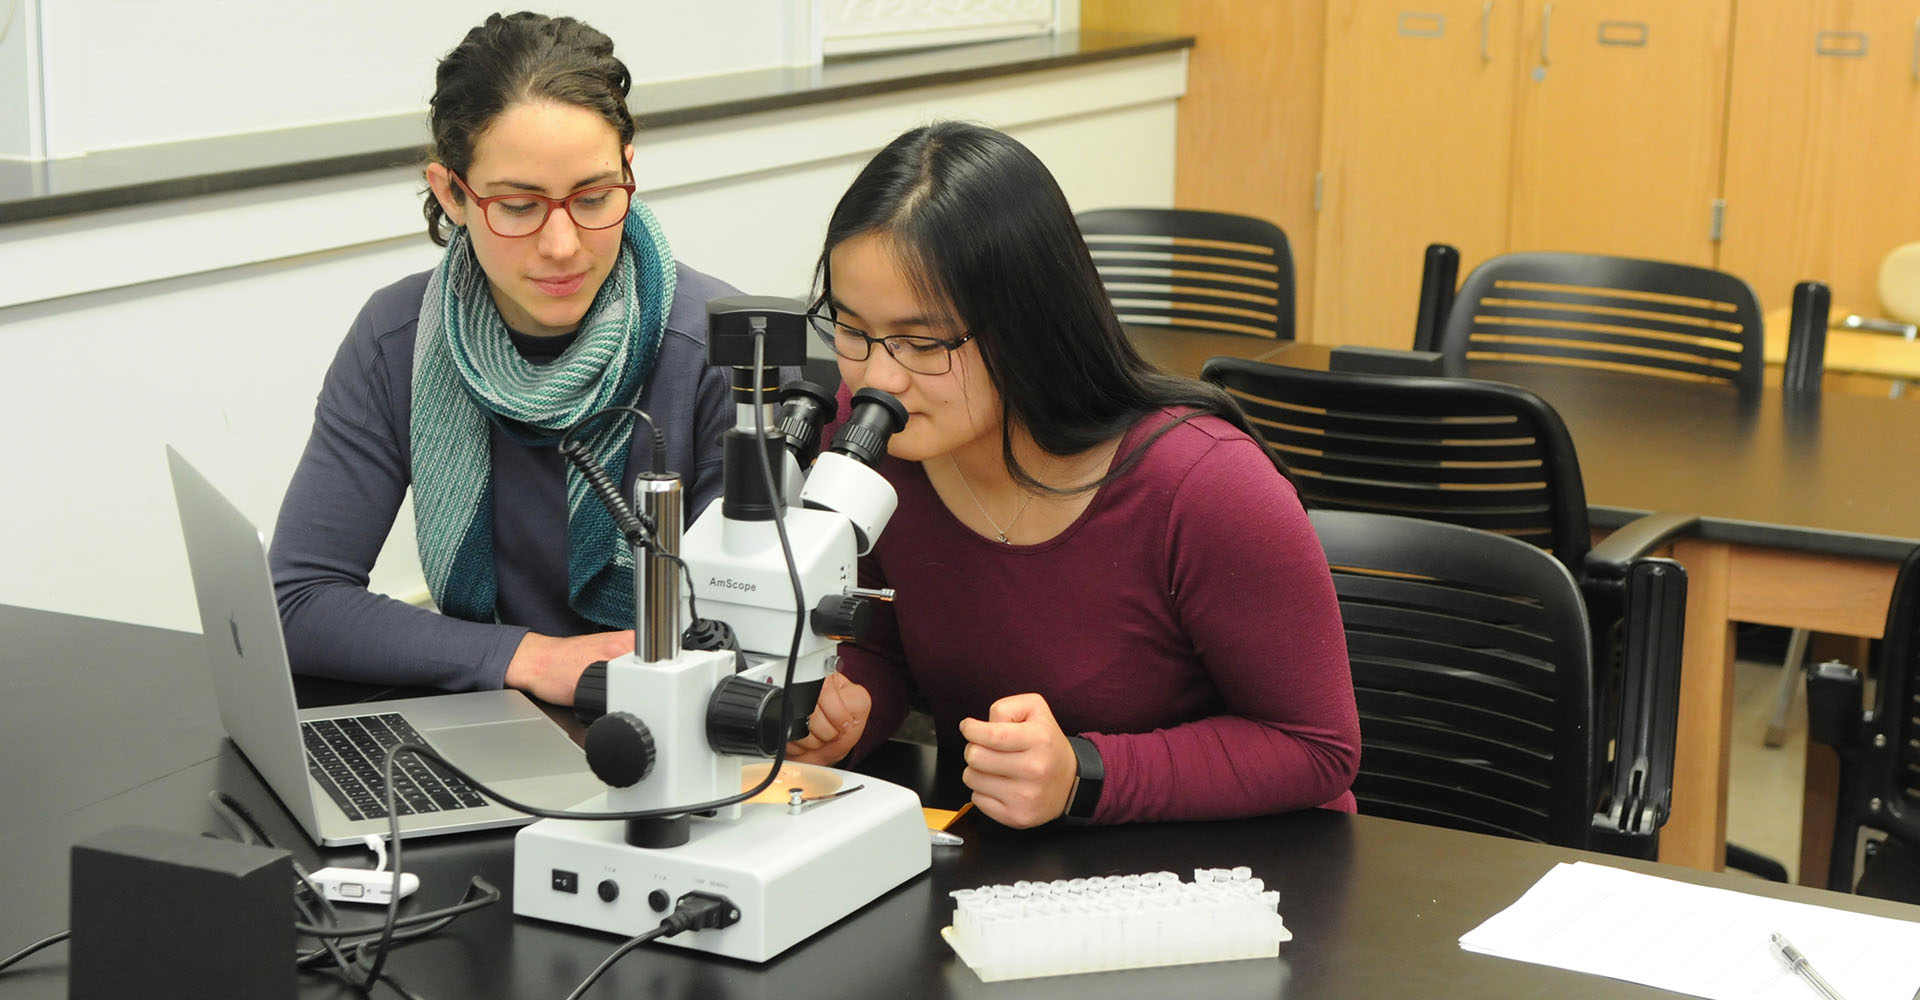 Professor and student using a microscope in a laboratory